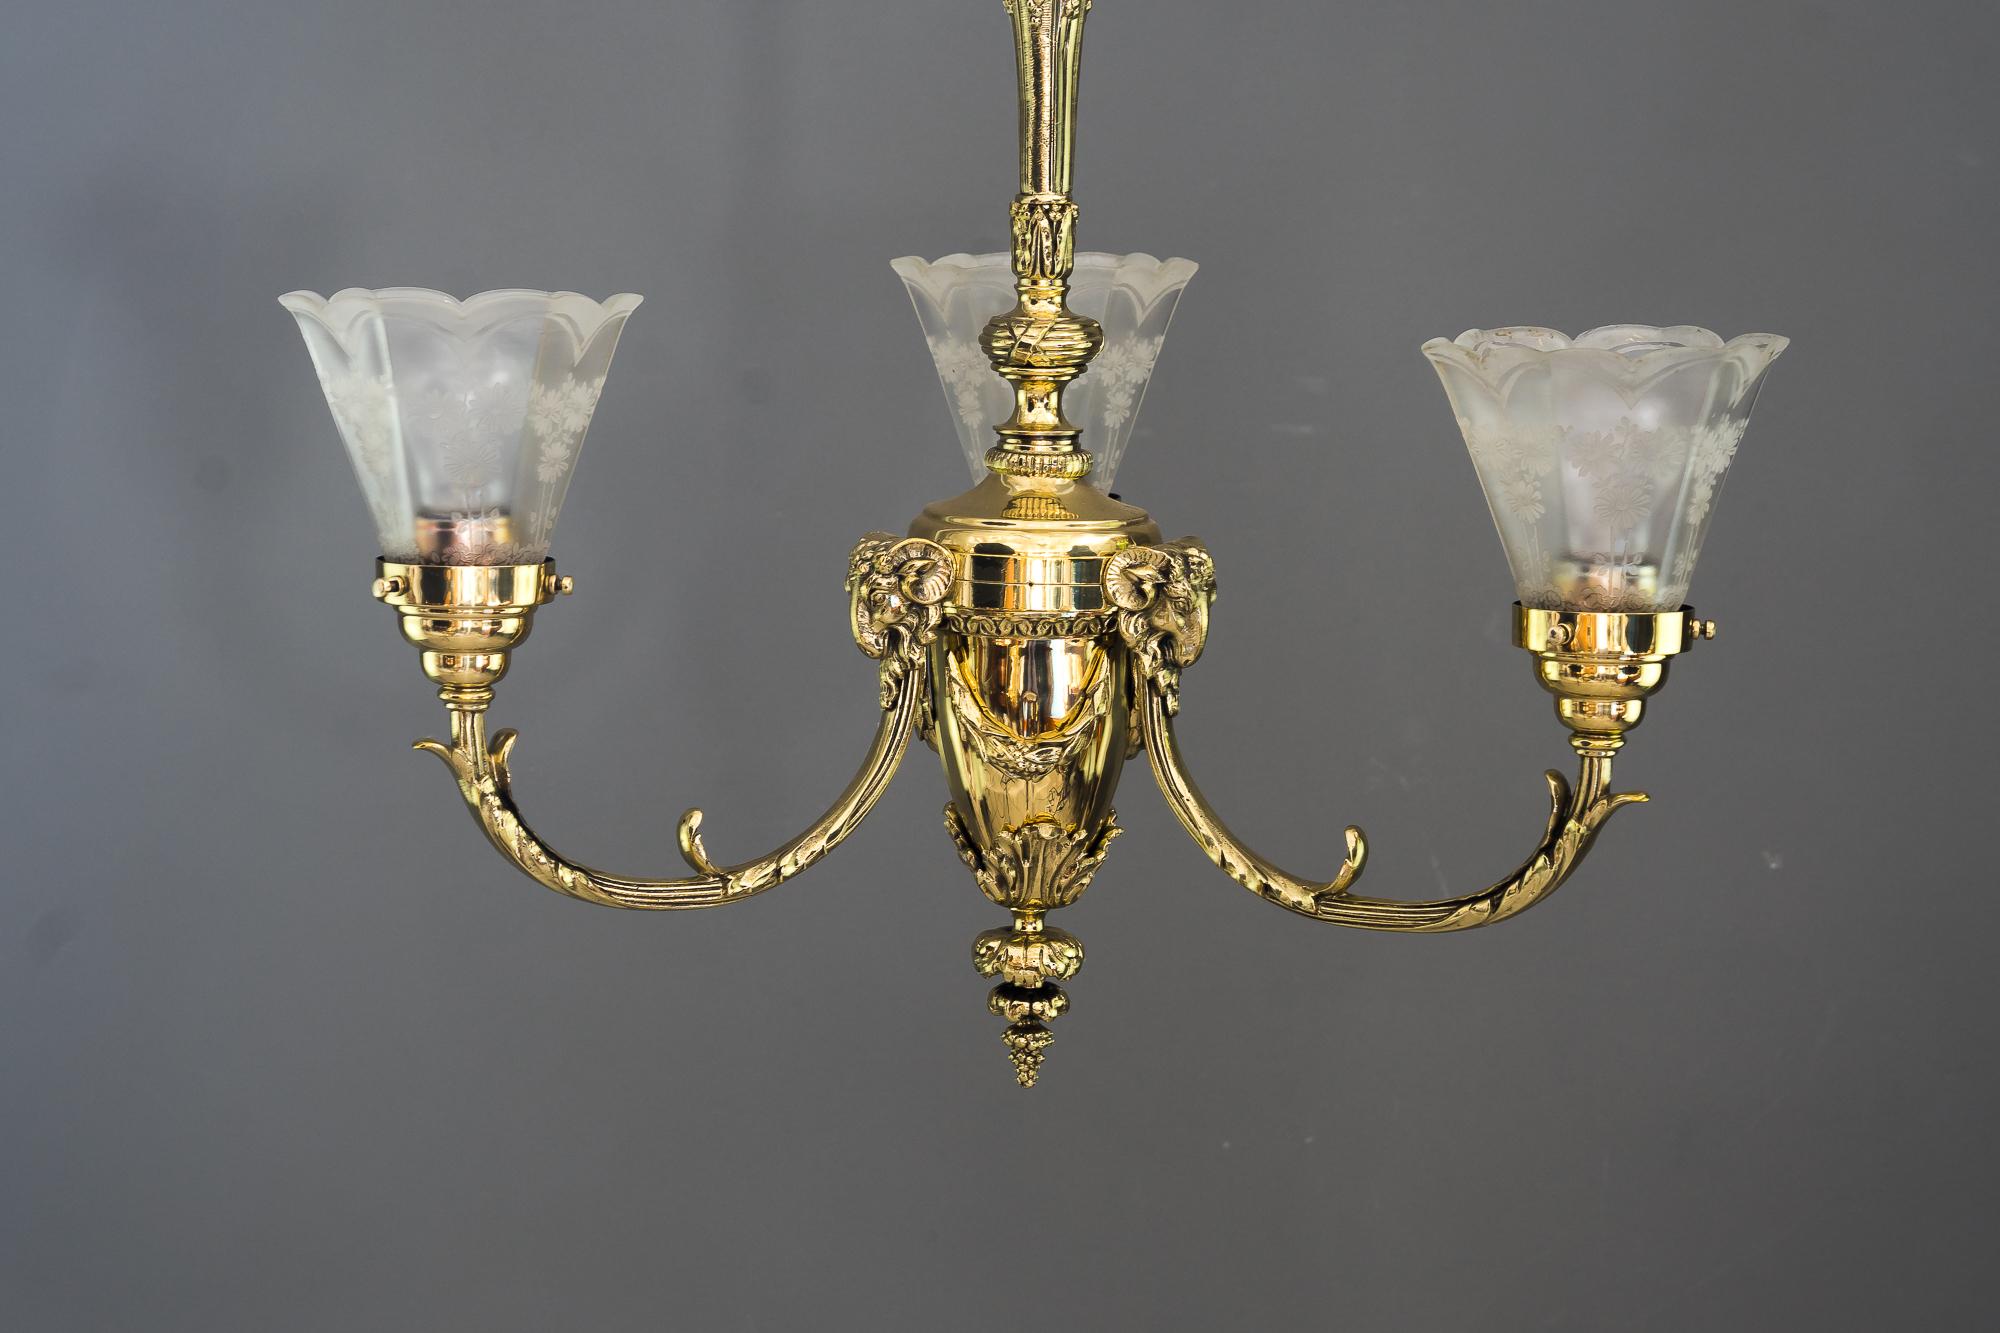 Historistic chandelier vienna around 1890s with Capricorn heads
Brass polished and stove enamelled
Original old glass shades.